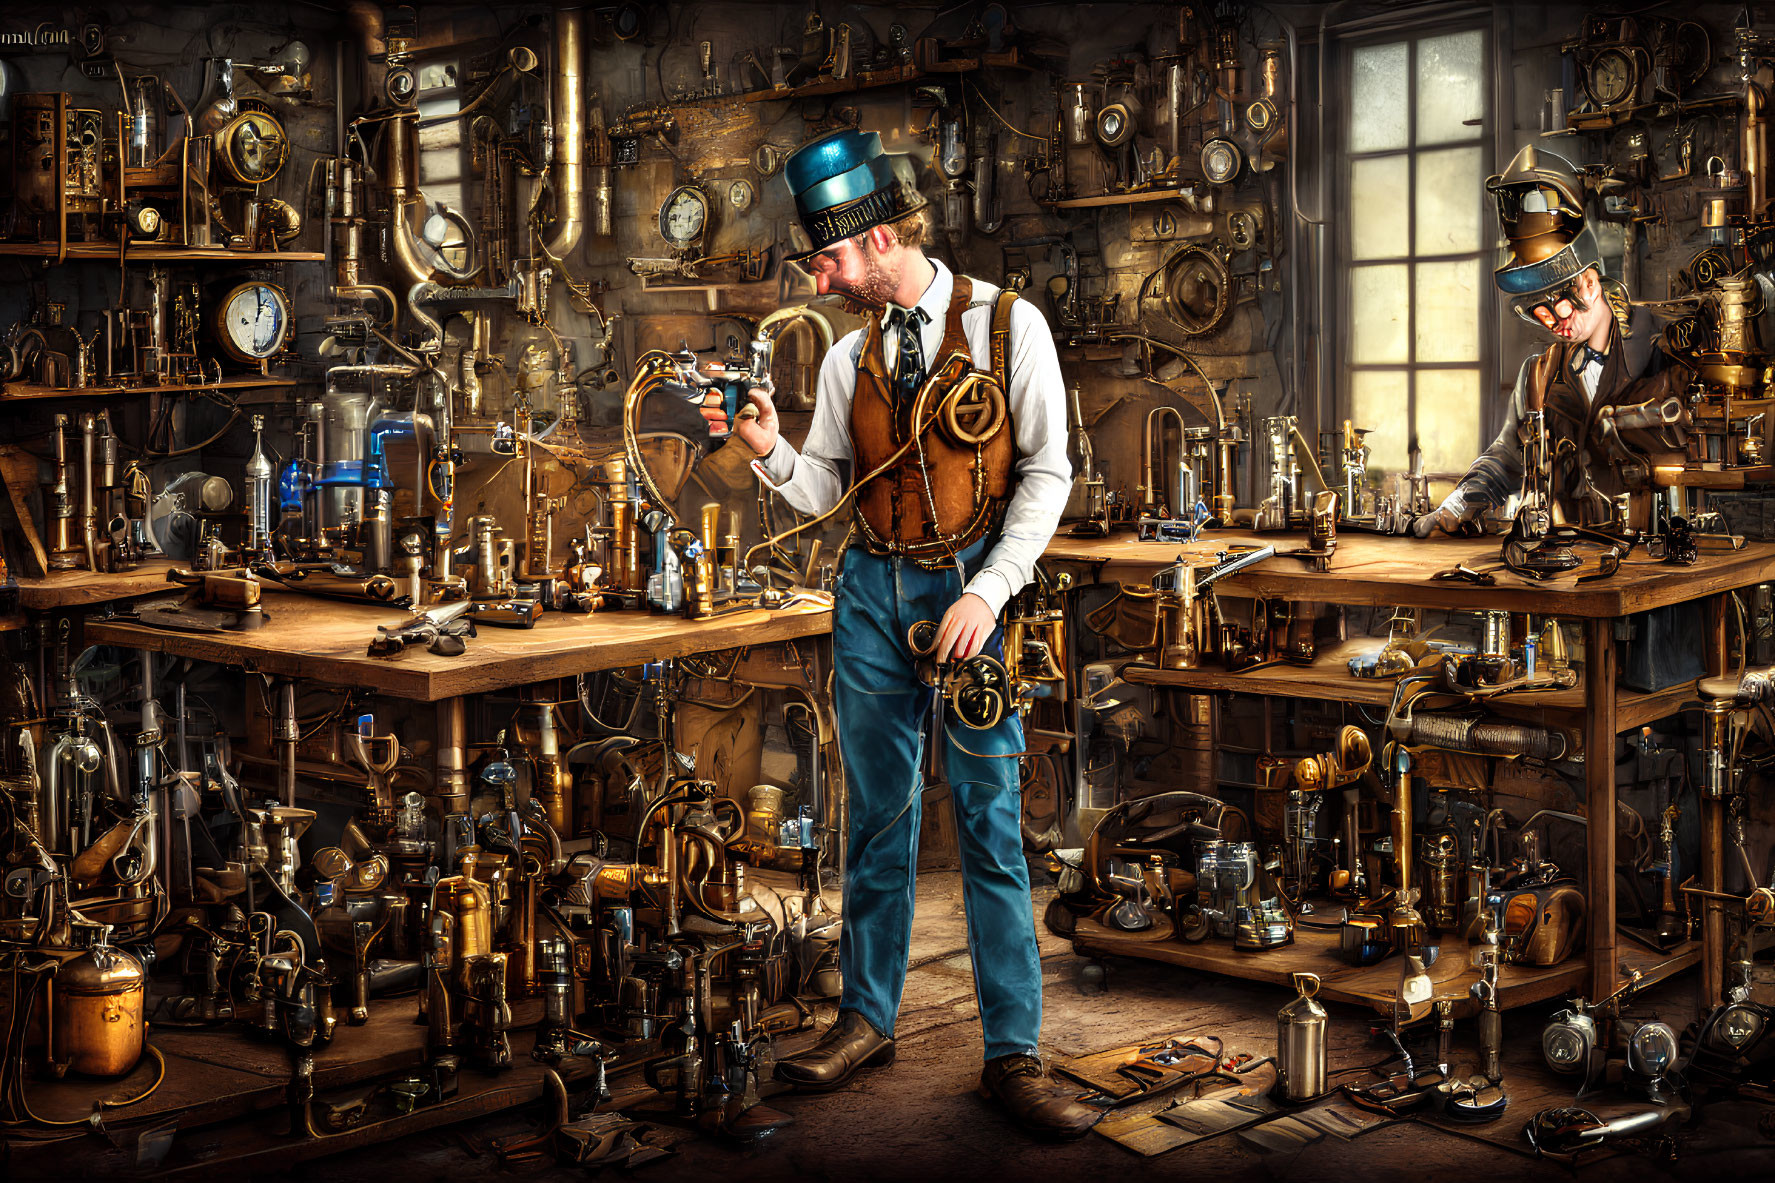 Steampunk-themed workshop with two people examining mechanical devices